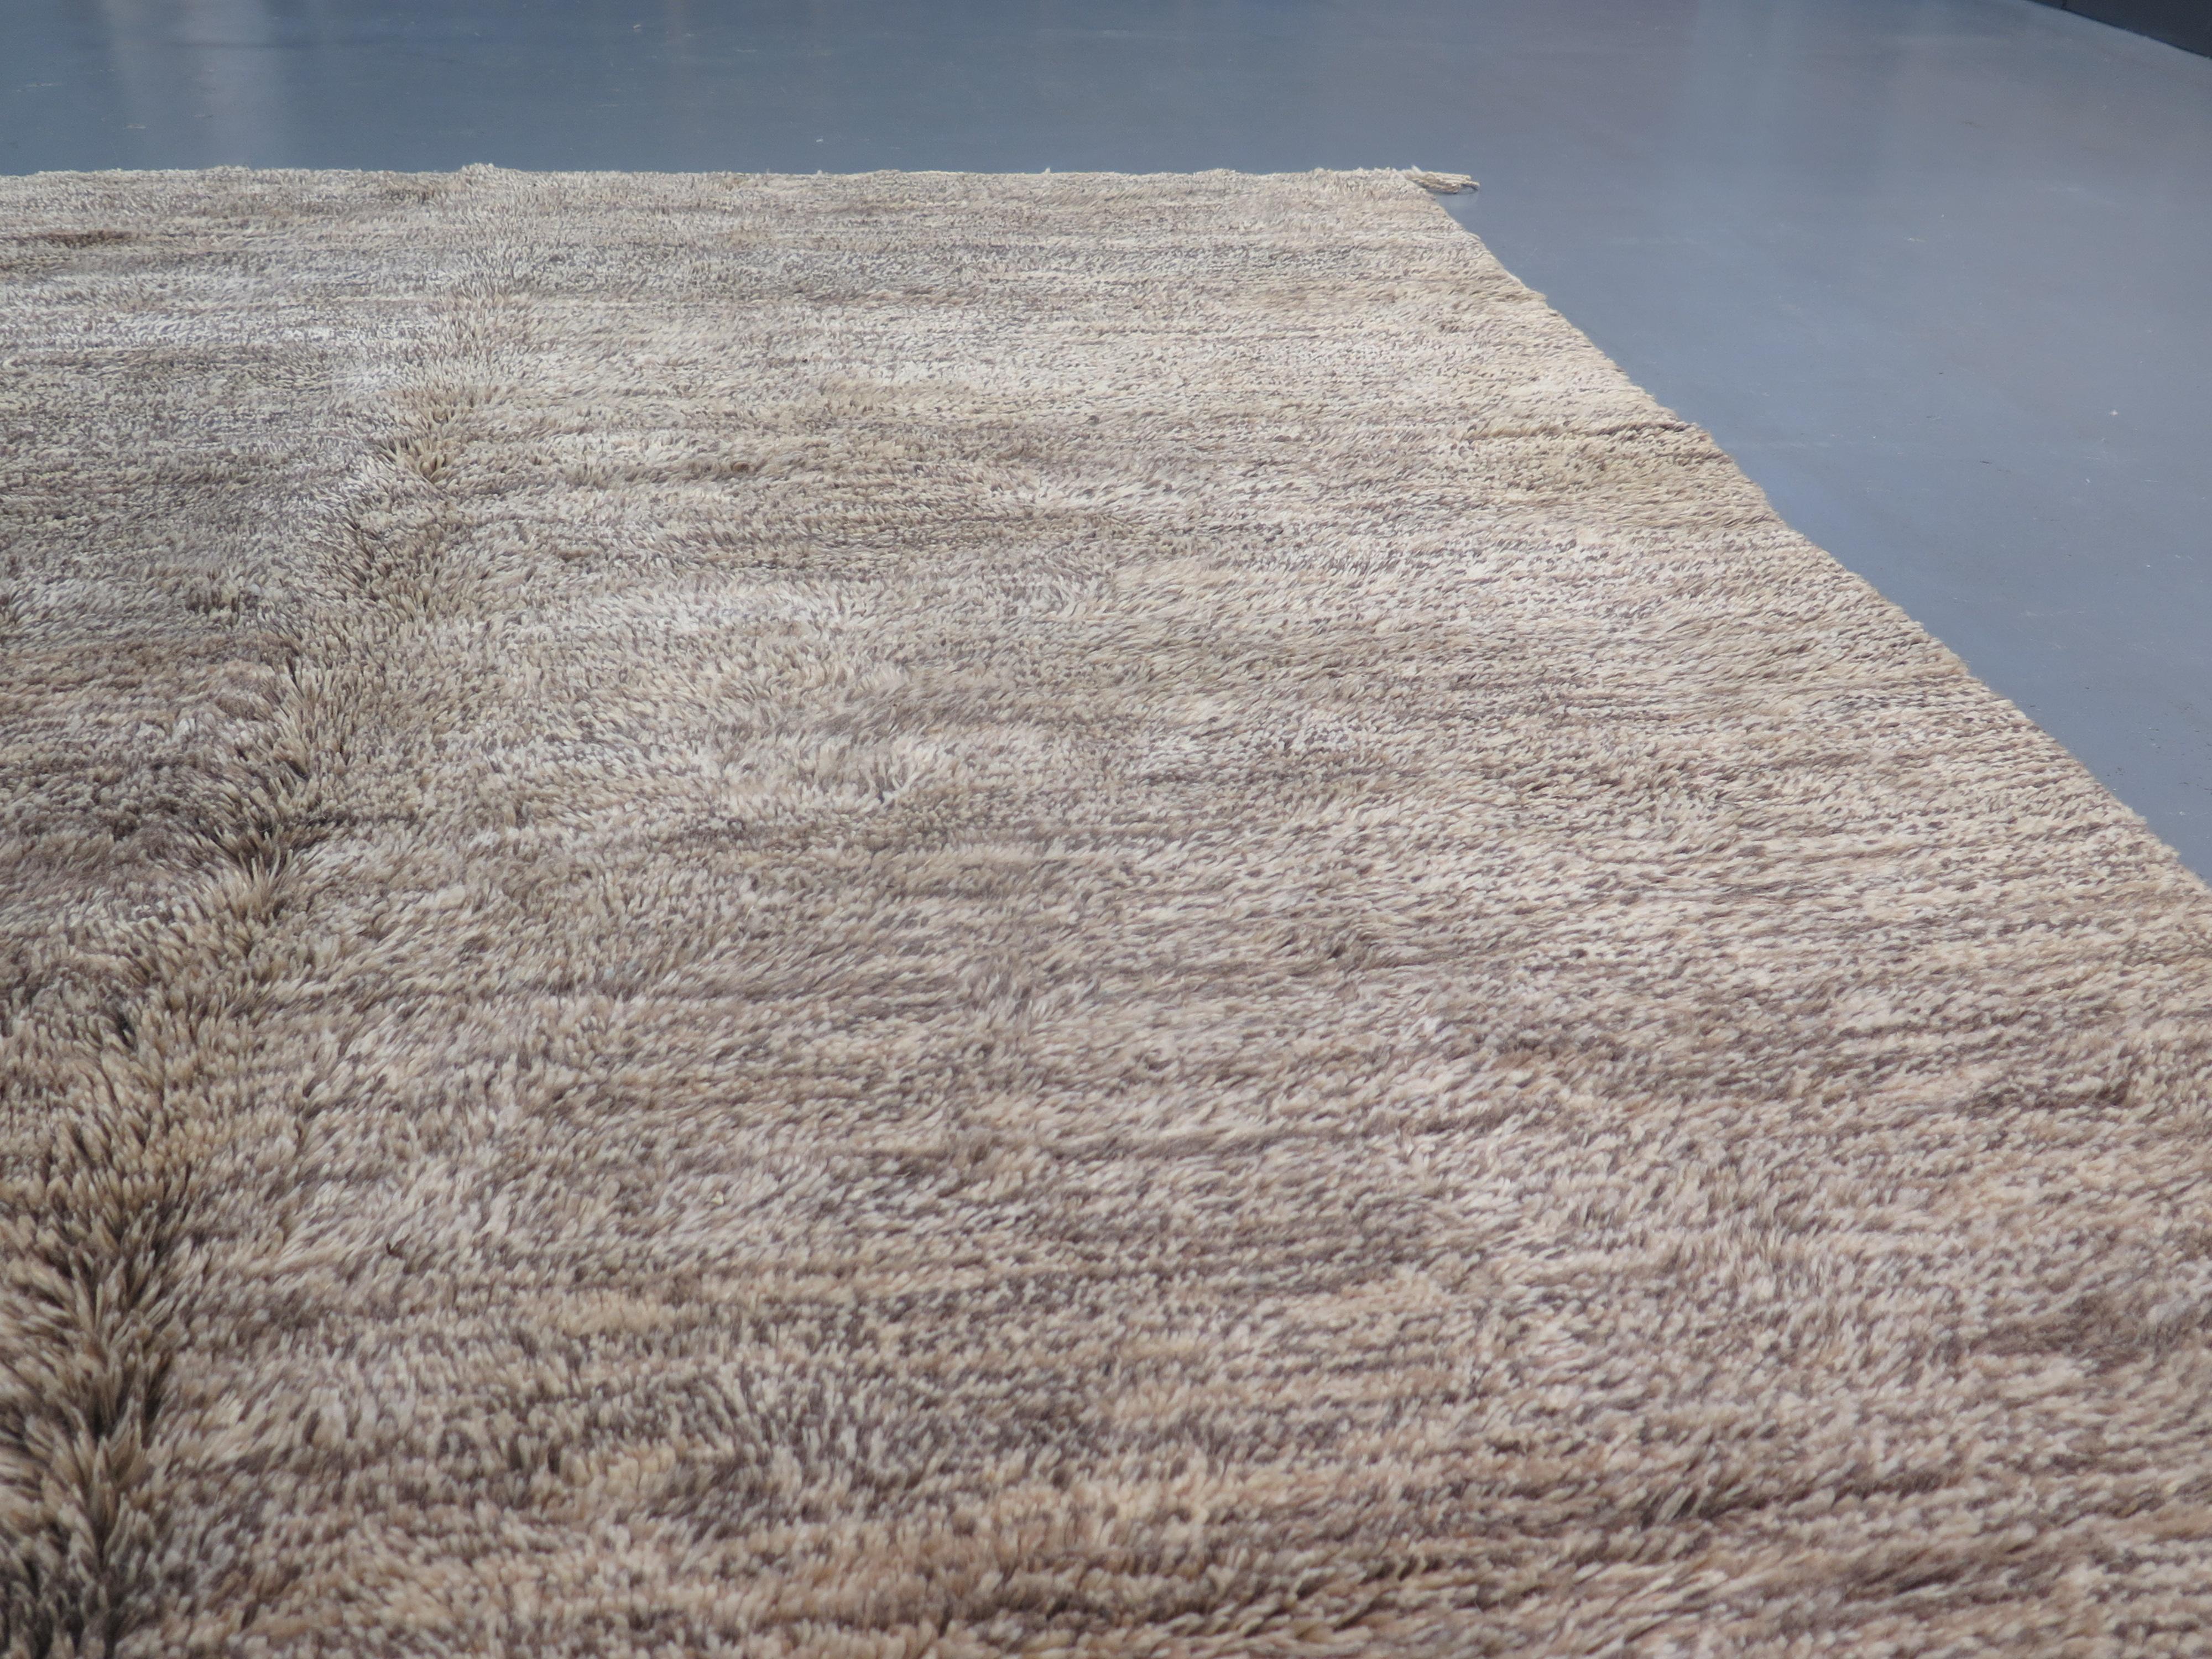 A contemporary Moroccan carpet, hand-knotted in high-grade wool, inspired by highly-sought after Mid-Century Modern Berber weavings, made popular by such designers as Alvar Aalto and Le Corbusier.

The natural abrash - or, colour variation - lent to